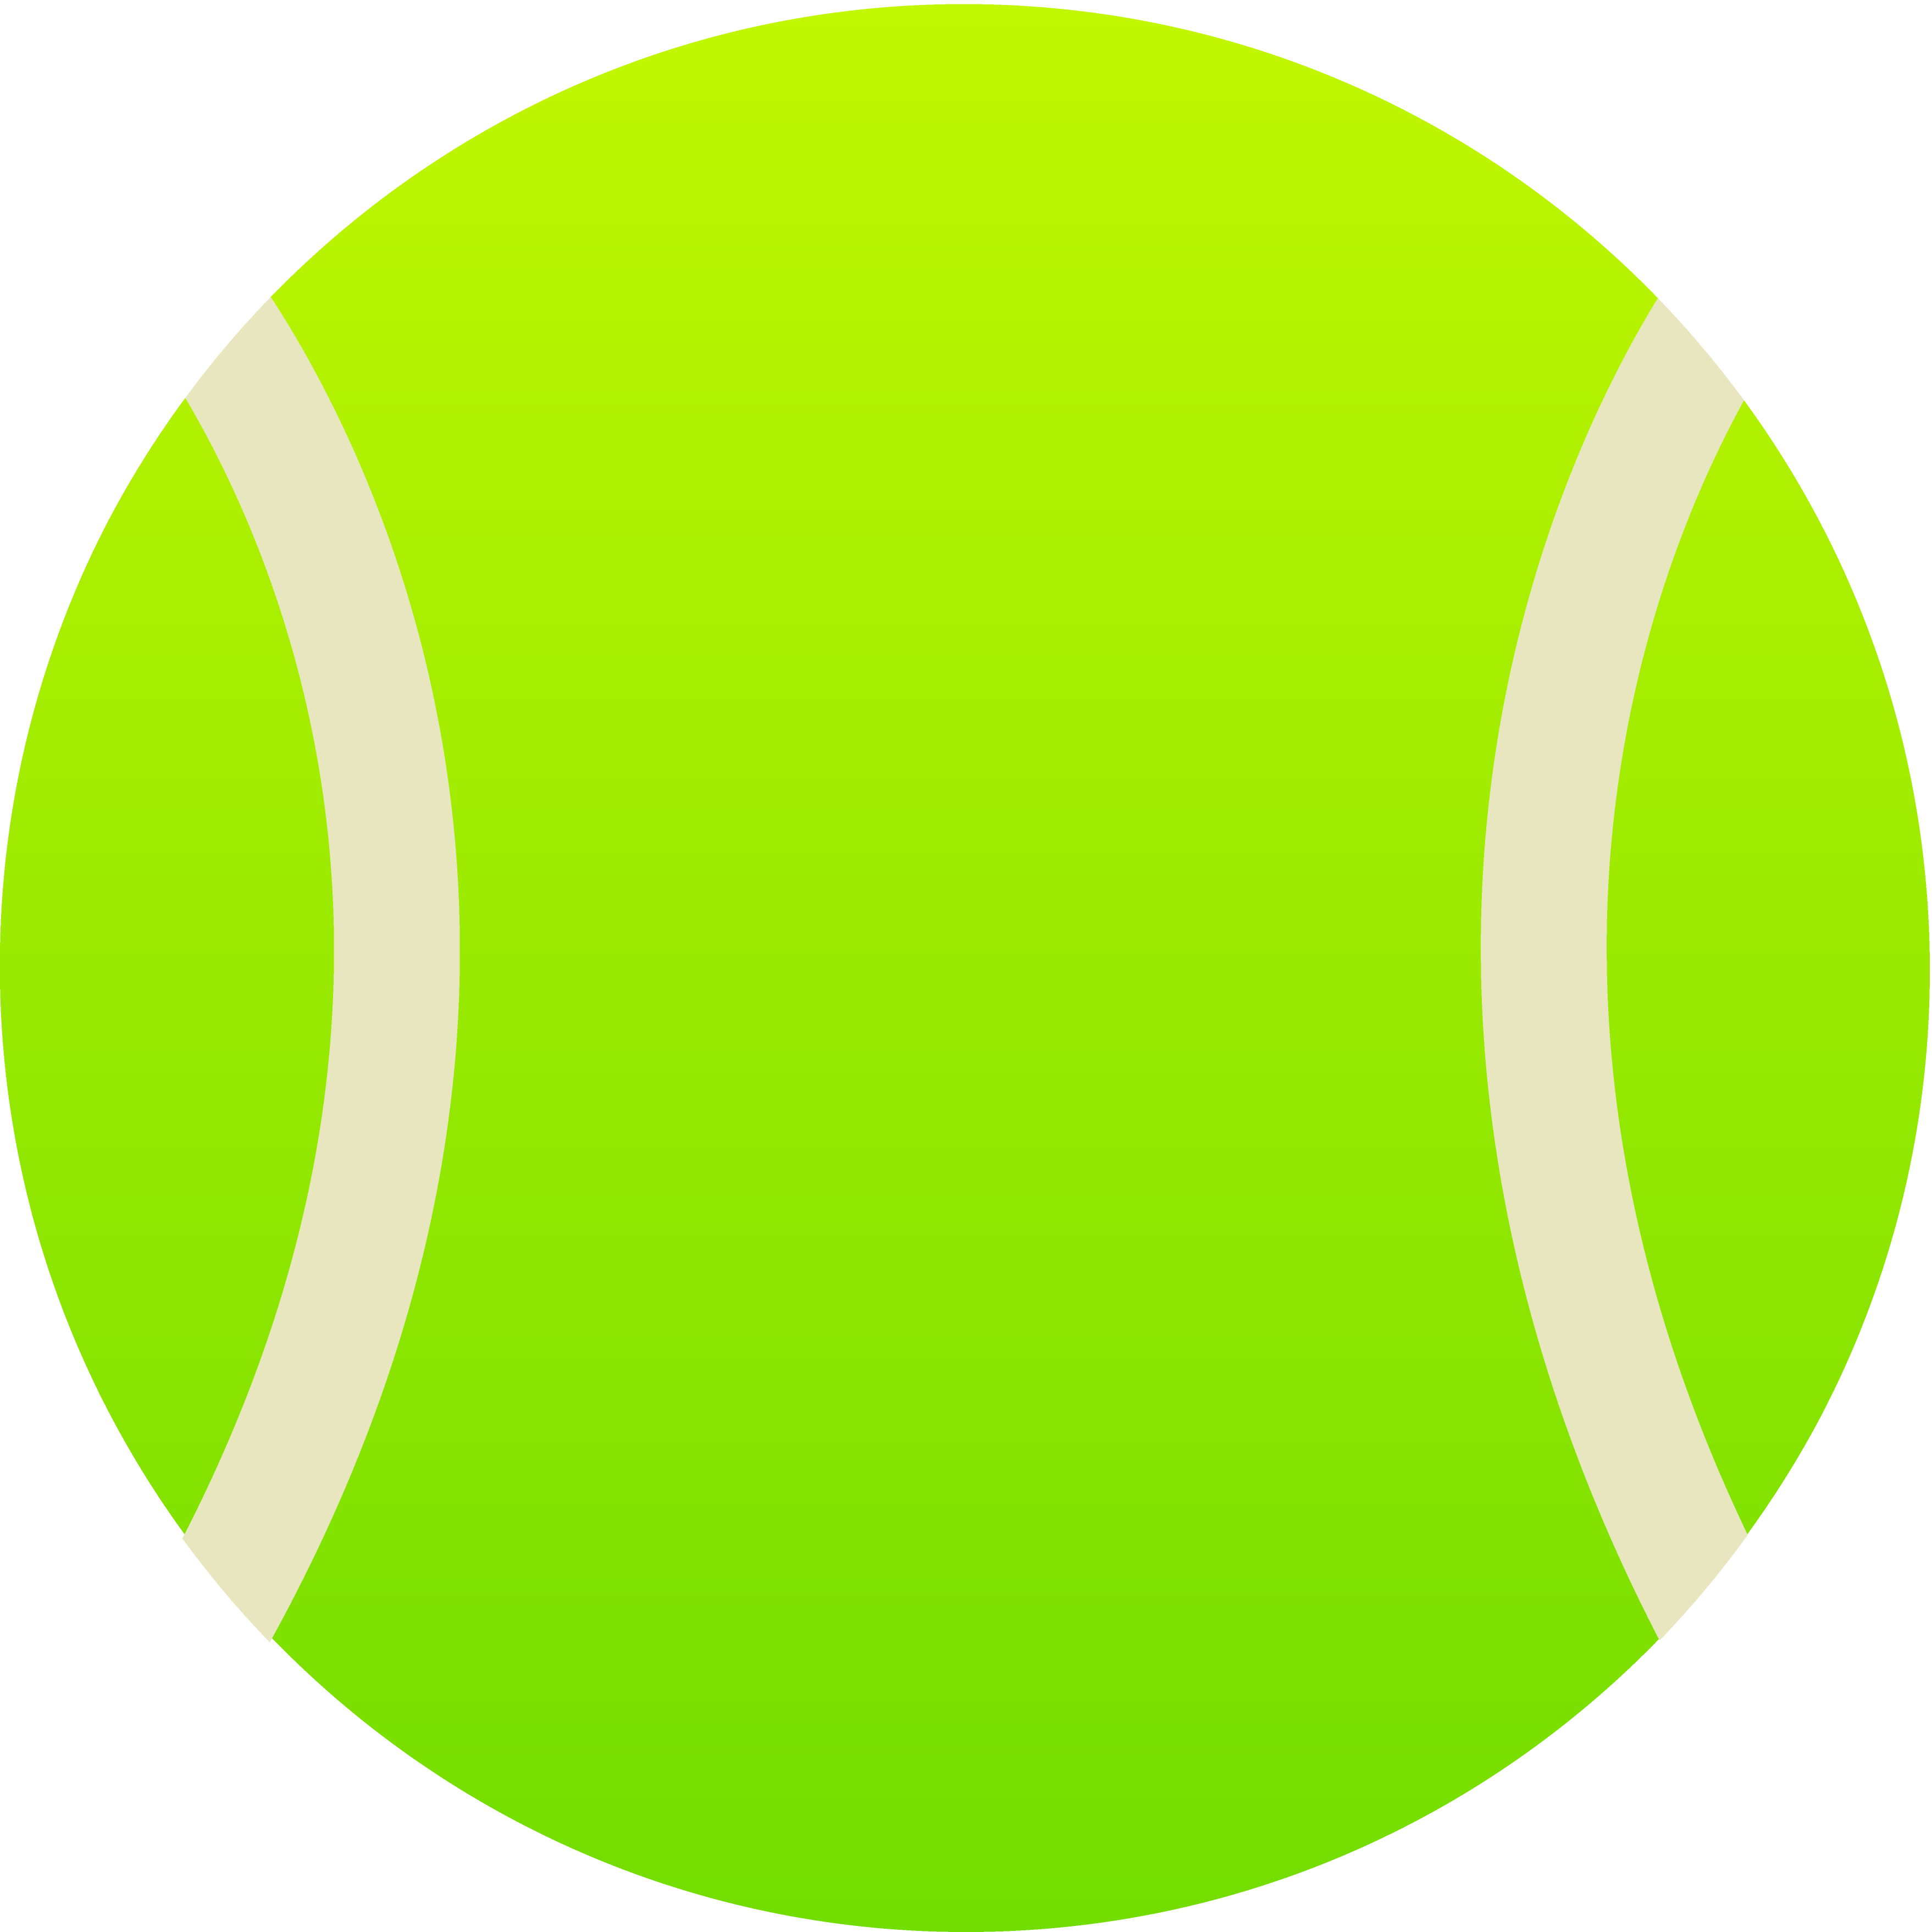 Free Tennis Ball Picture, Download Free Clip Art, Free Clip Art on.